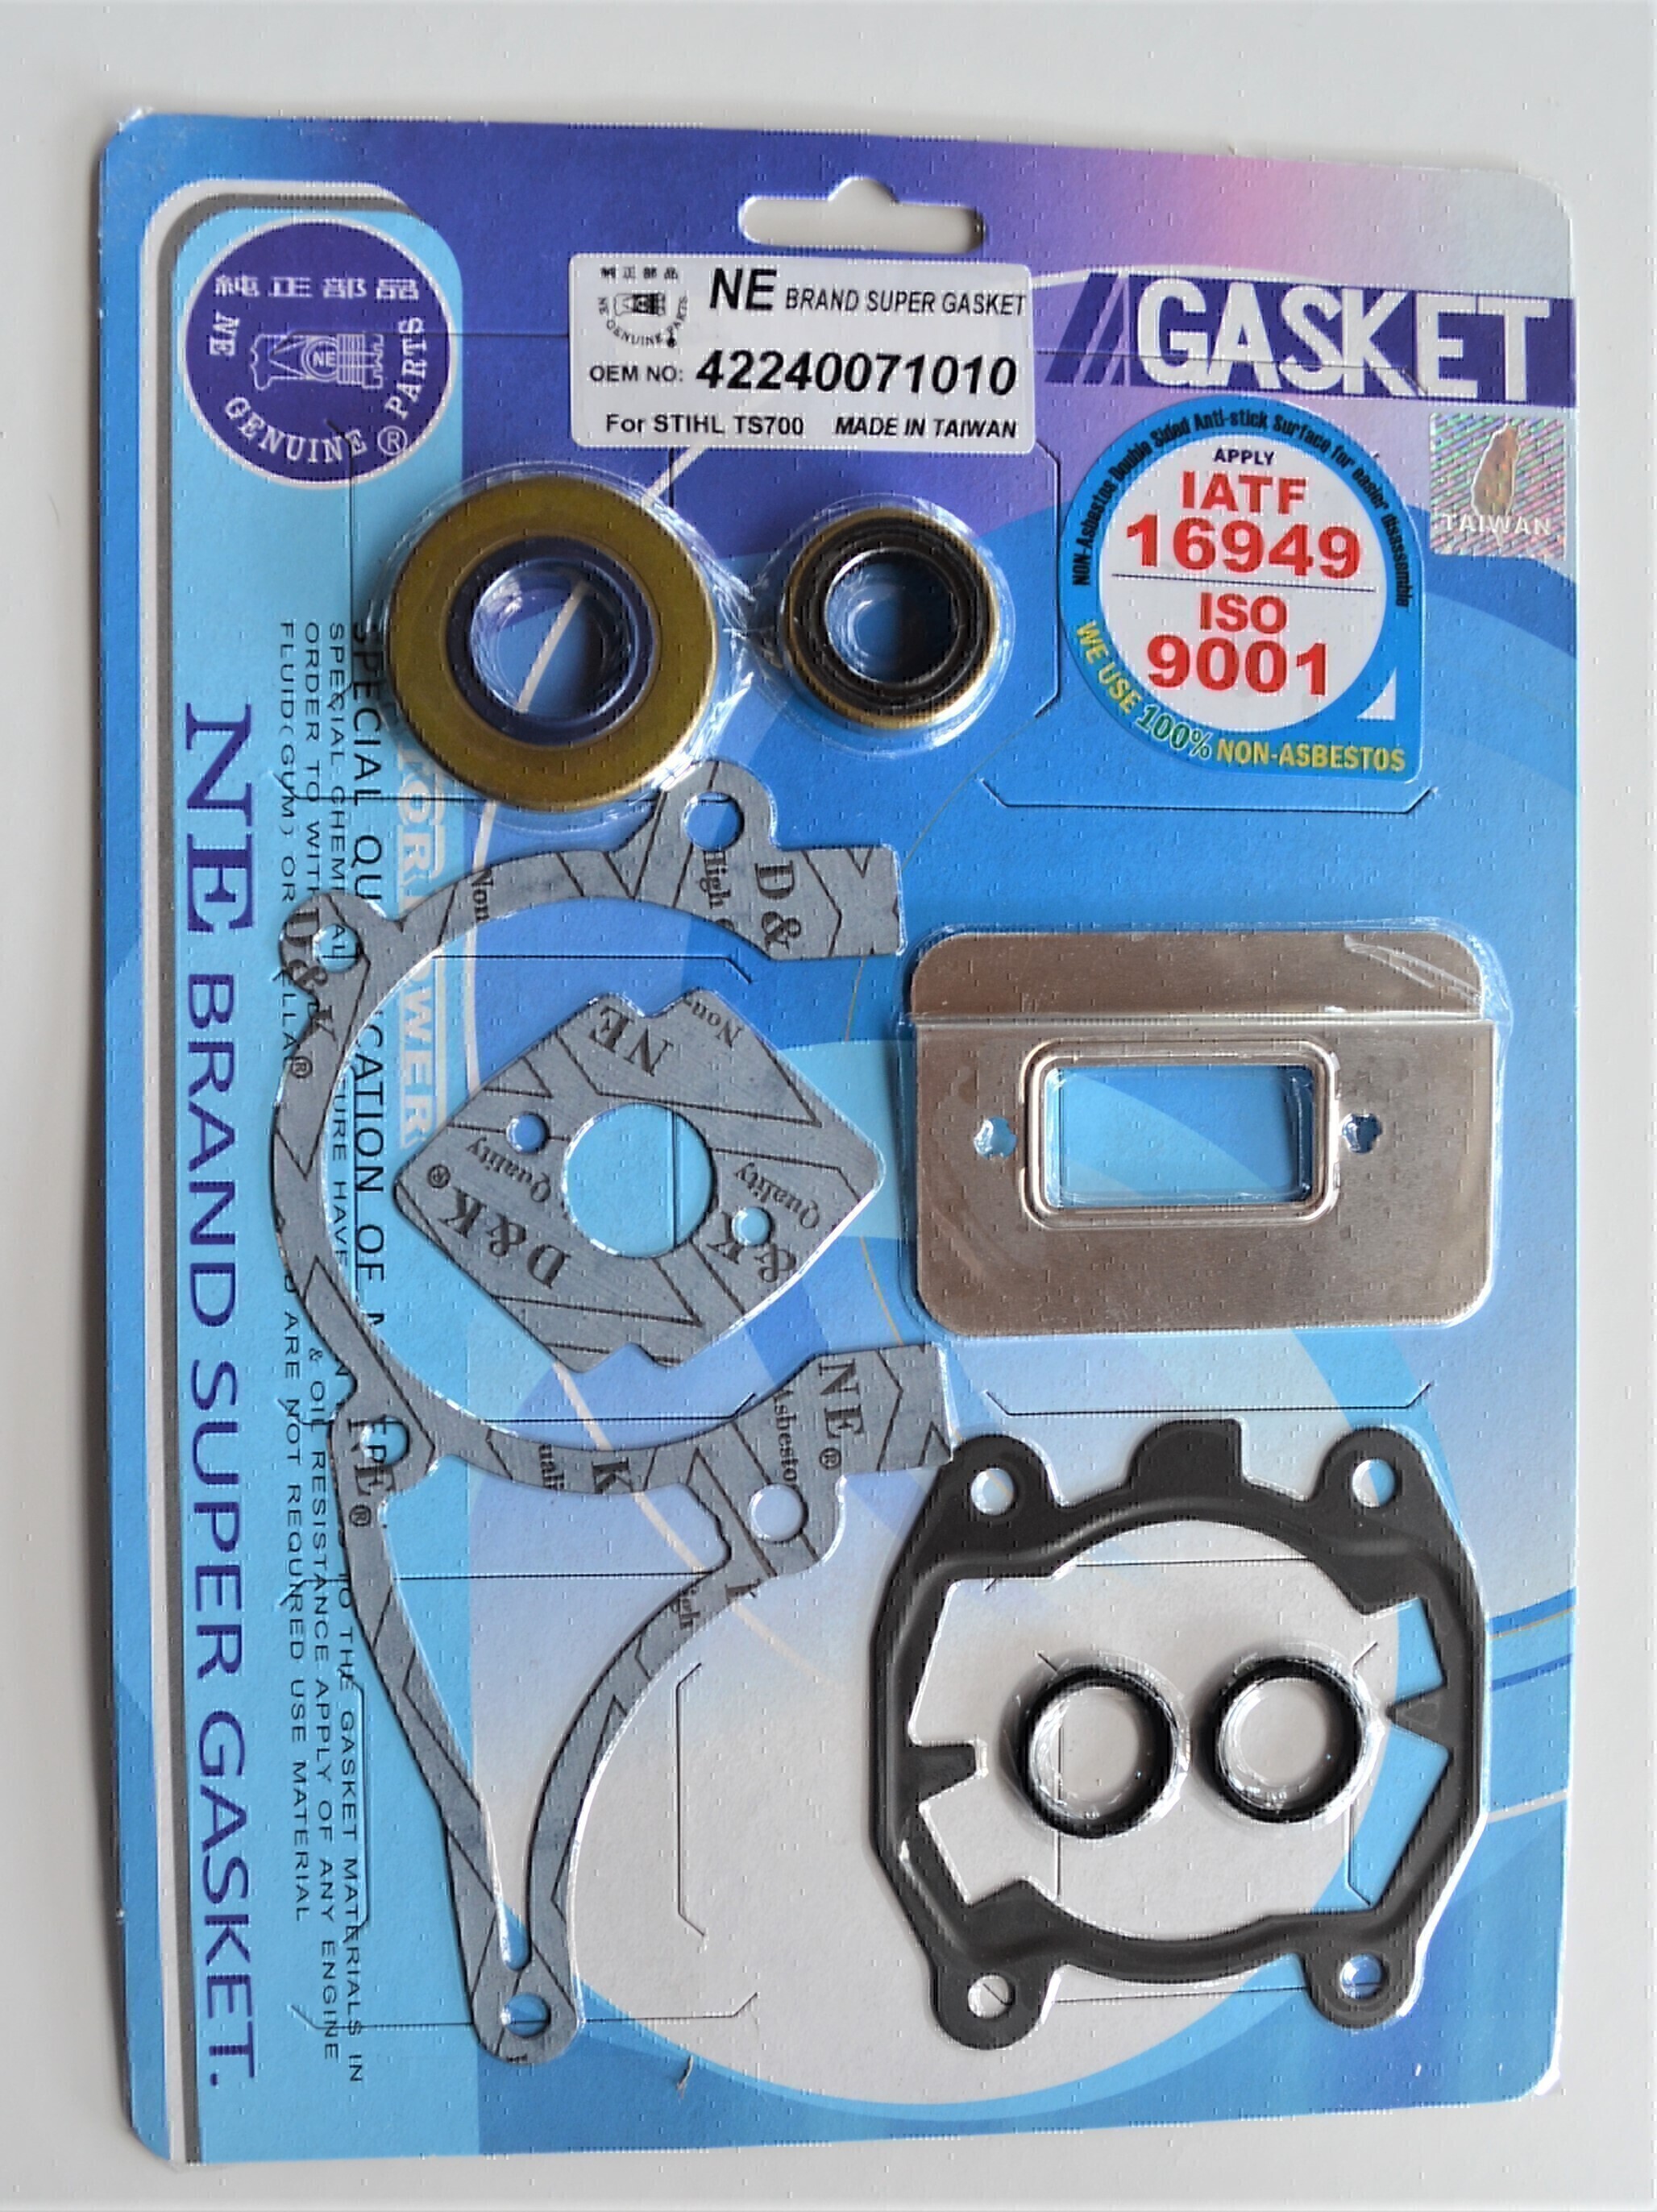 COMPLETE GASKET & OIL SEAL KIT FOR STIHL TS700 TS800 CUT OFF SAW # 4224 007 1010